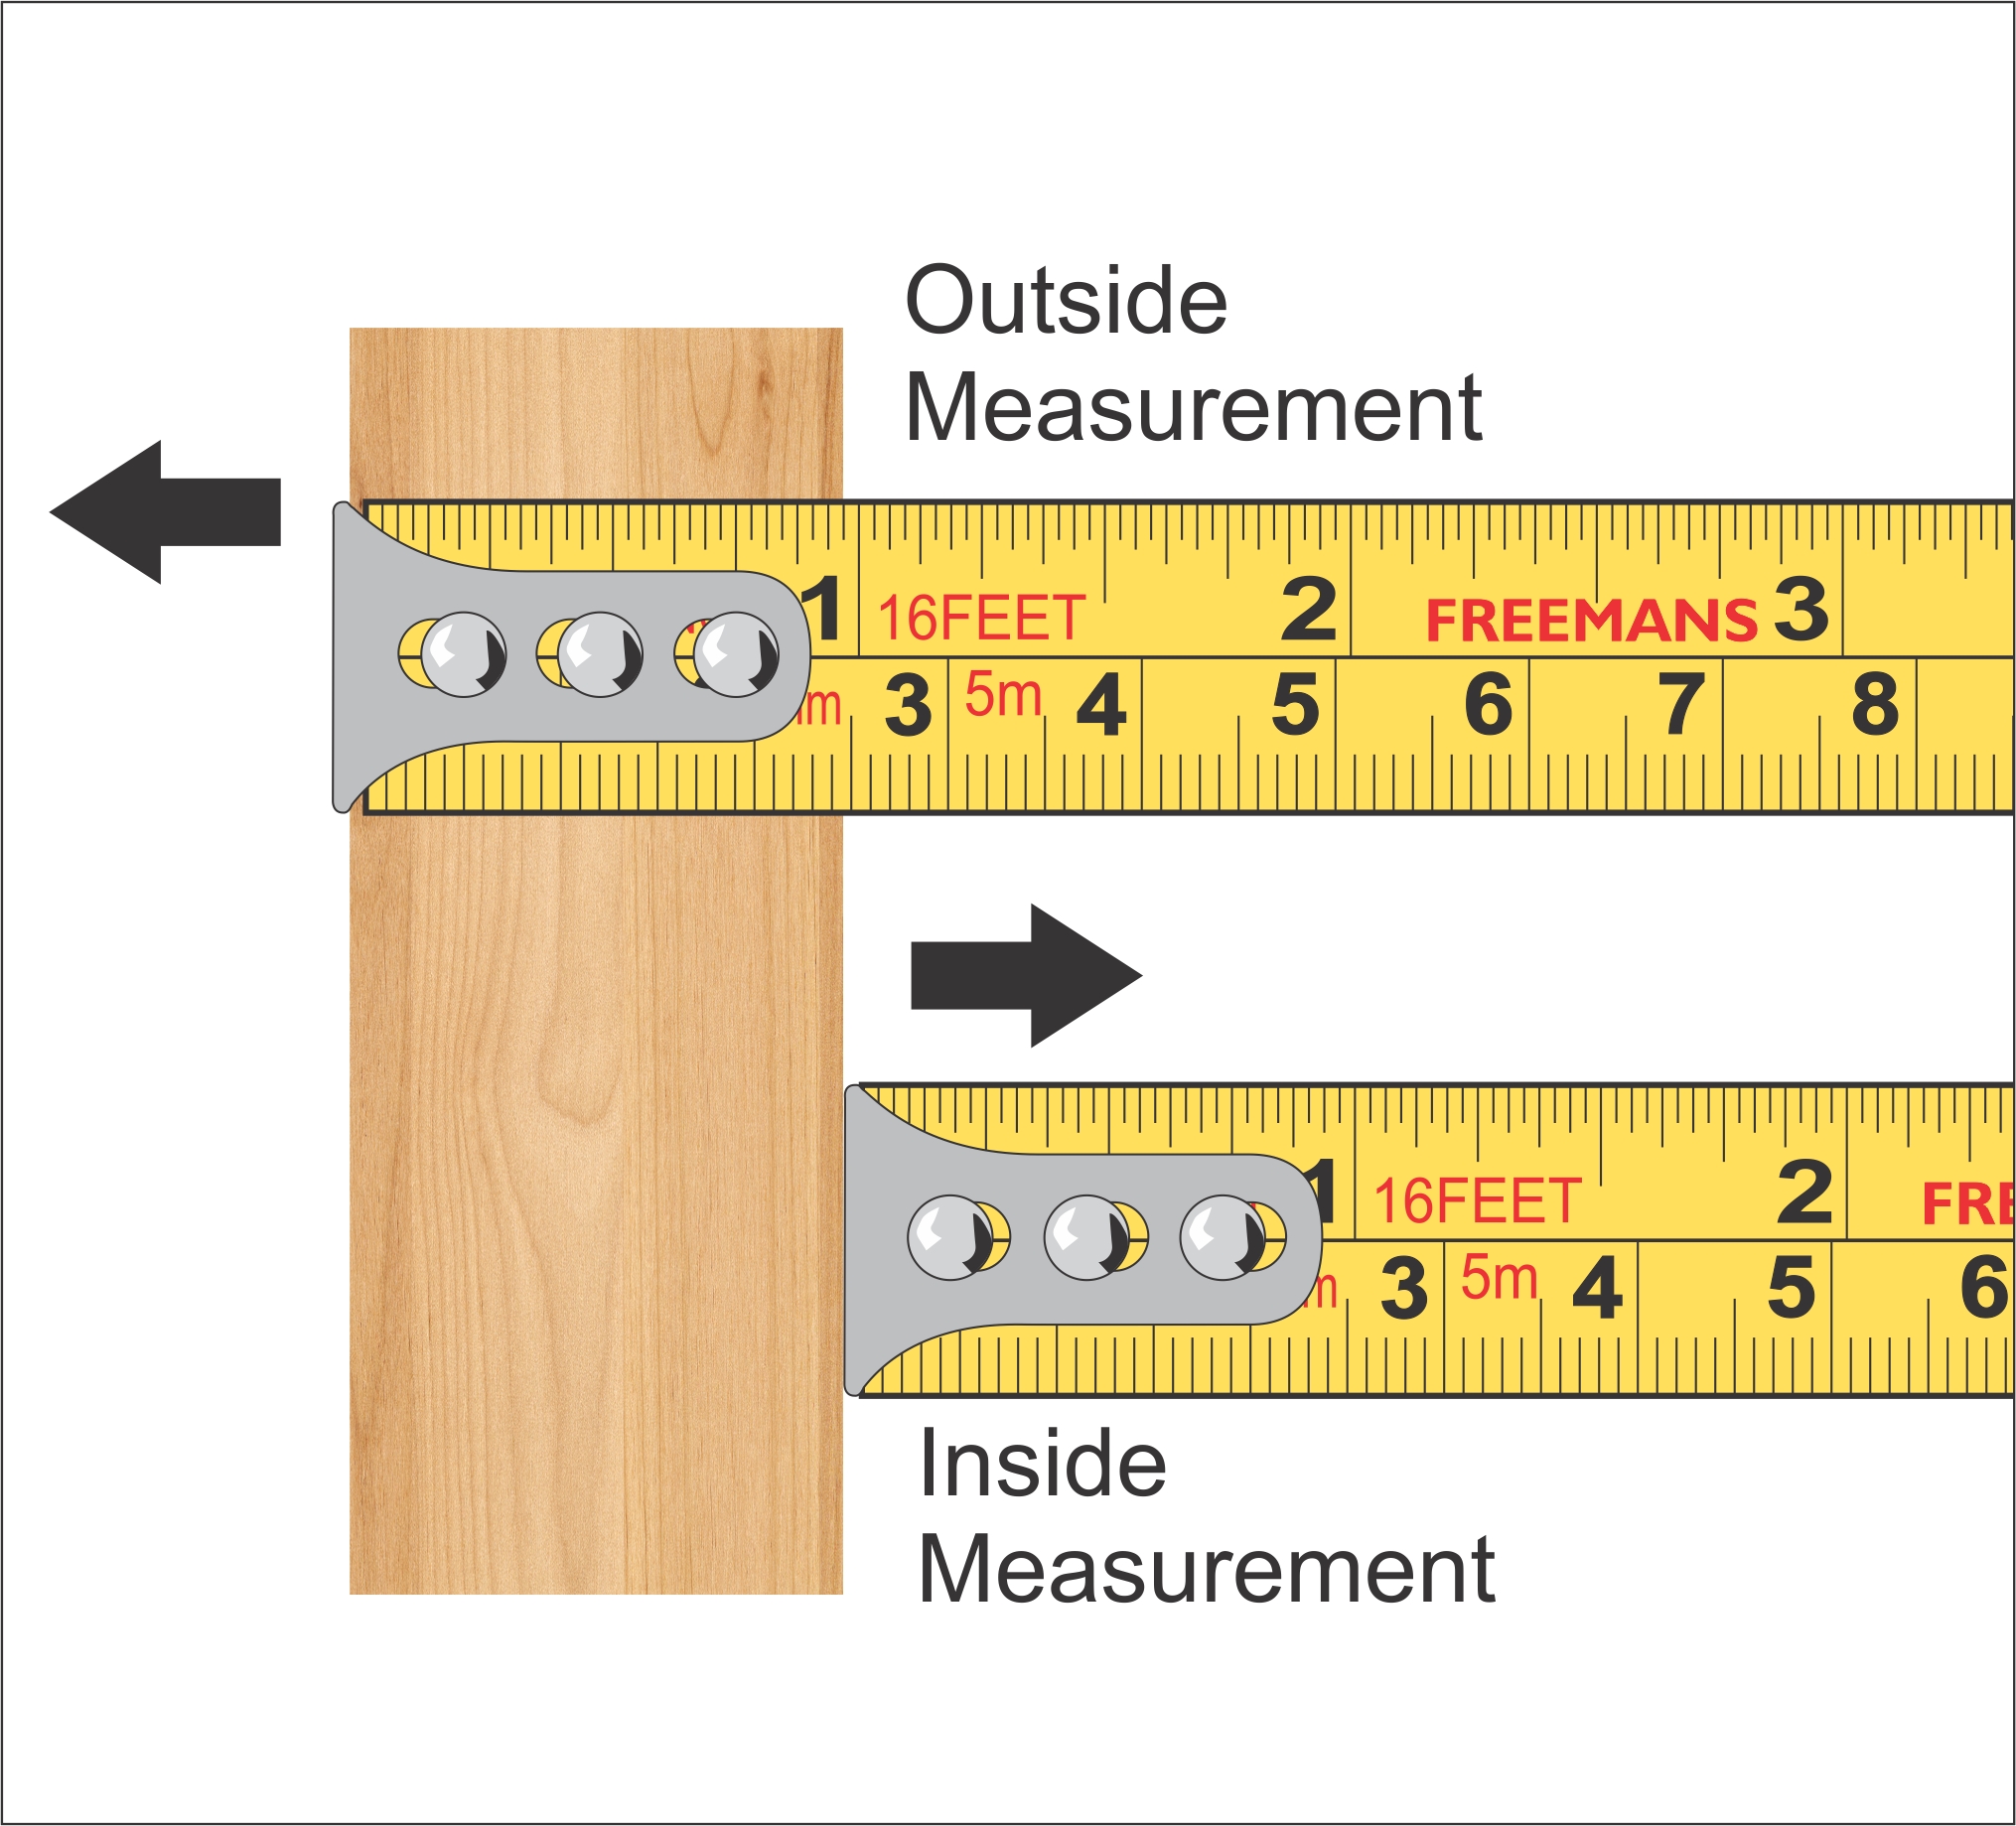 How to Accurately Read a Tape Measure